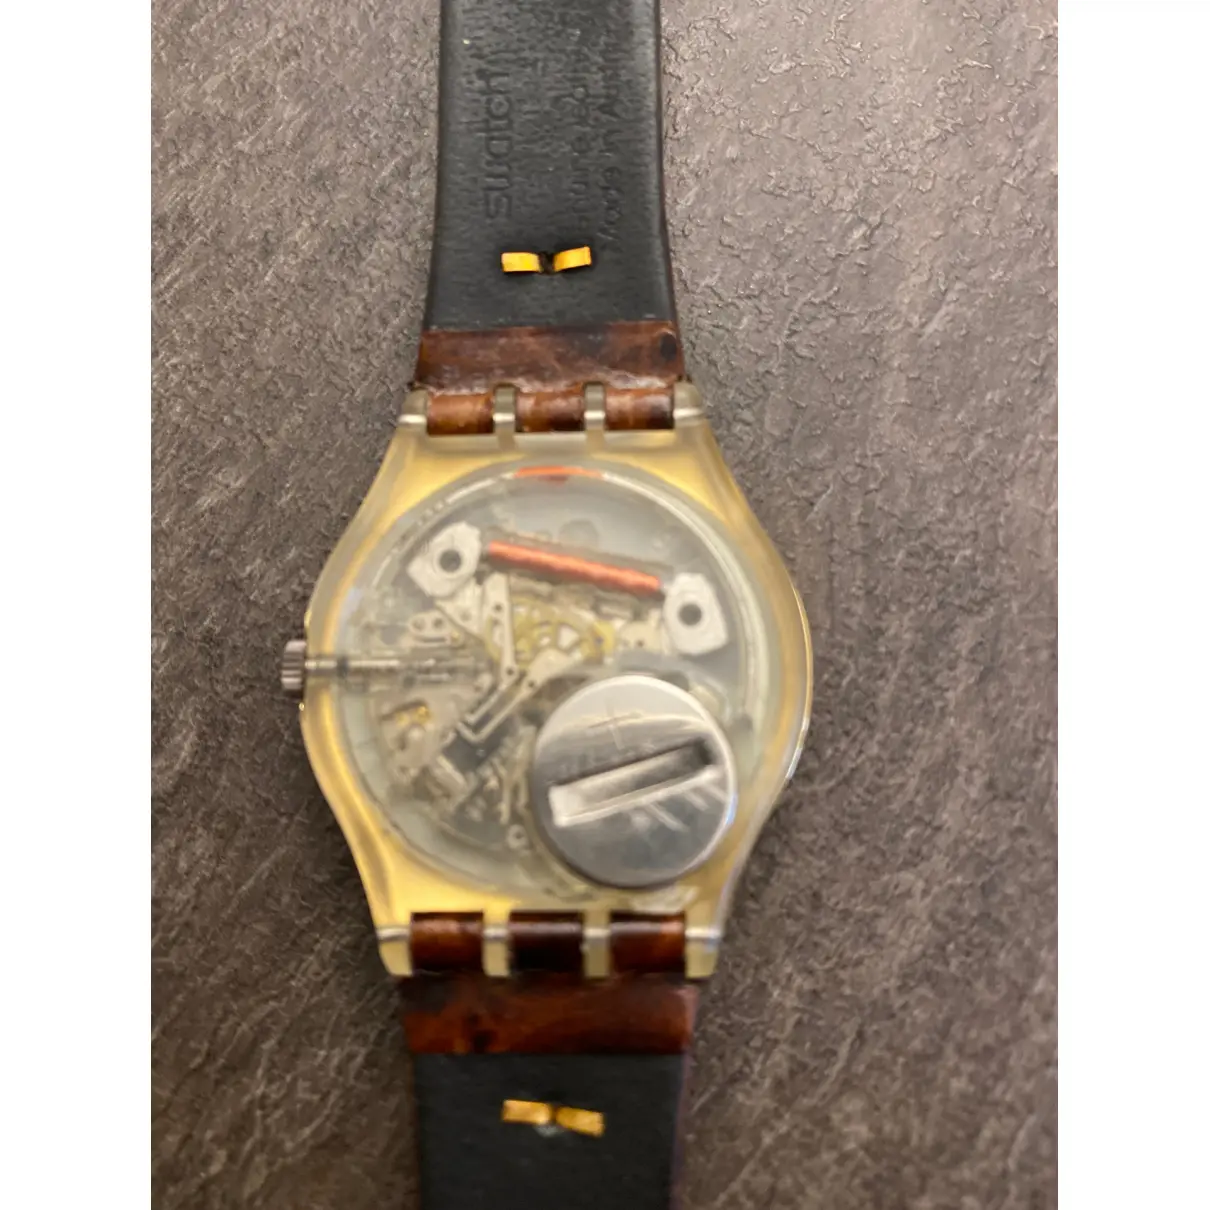 Buy Swatch Leather watch online - Vintage